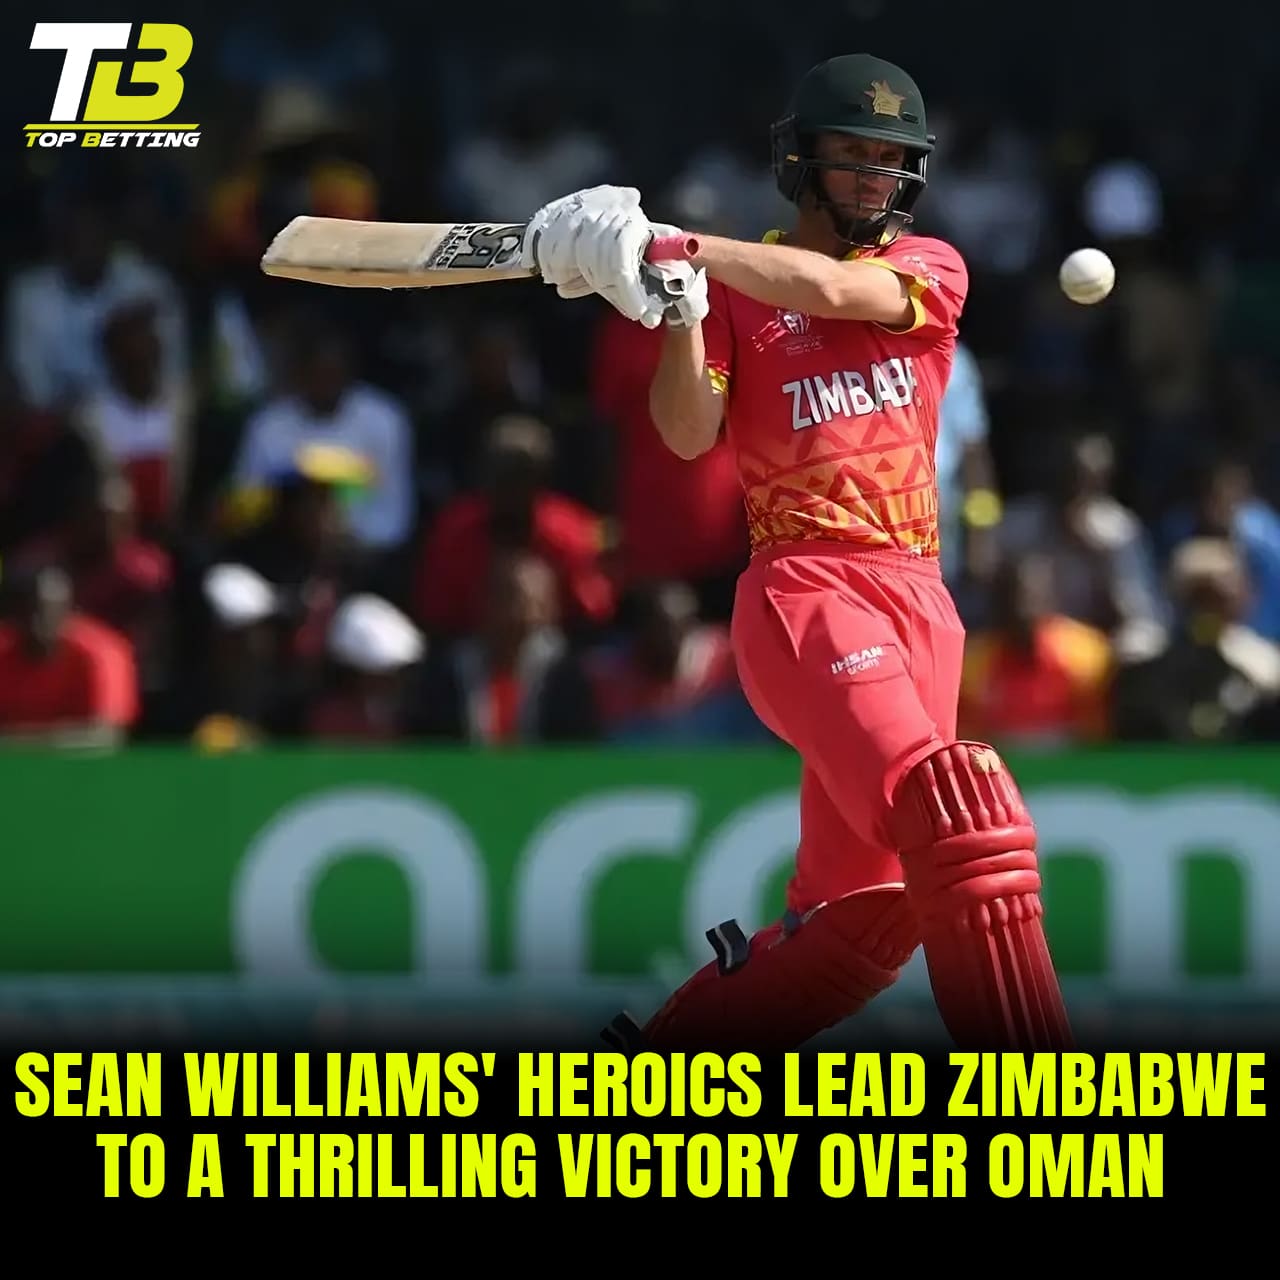 Sean Williams’ Heroics Lead Zimbabwe to a Thrilling Victory over Oman